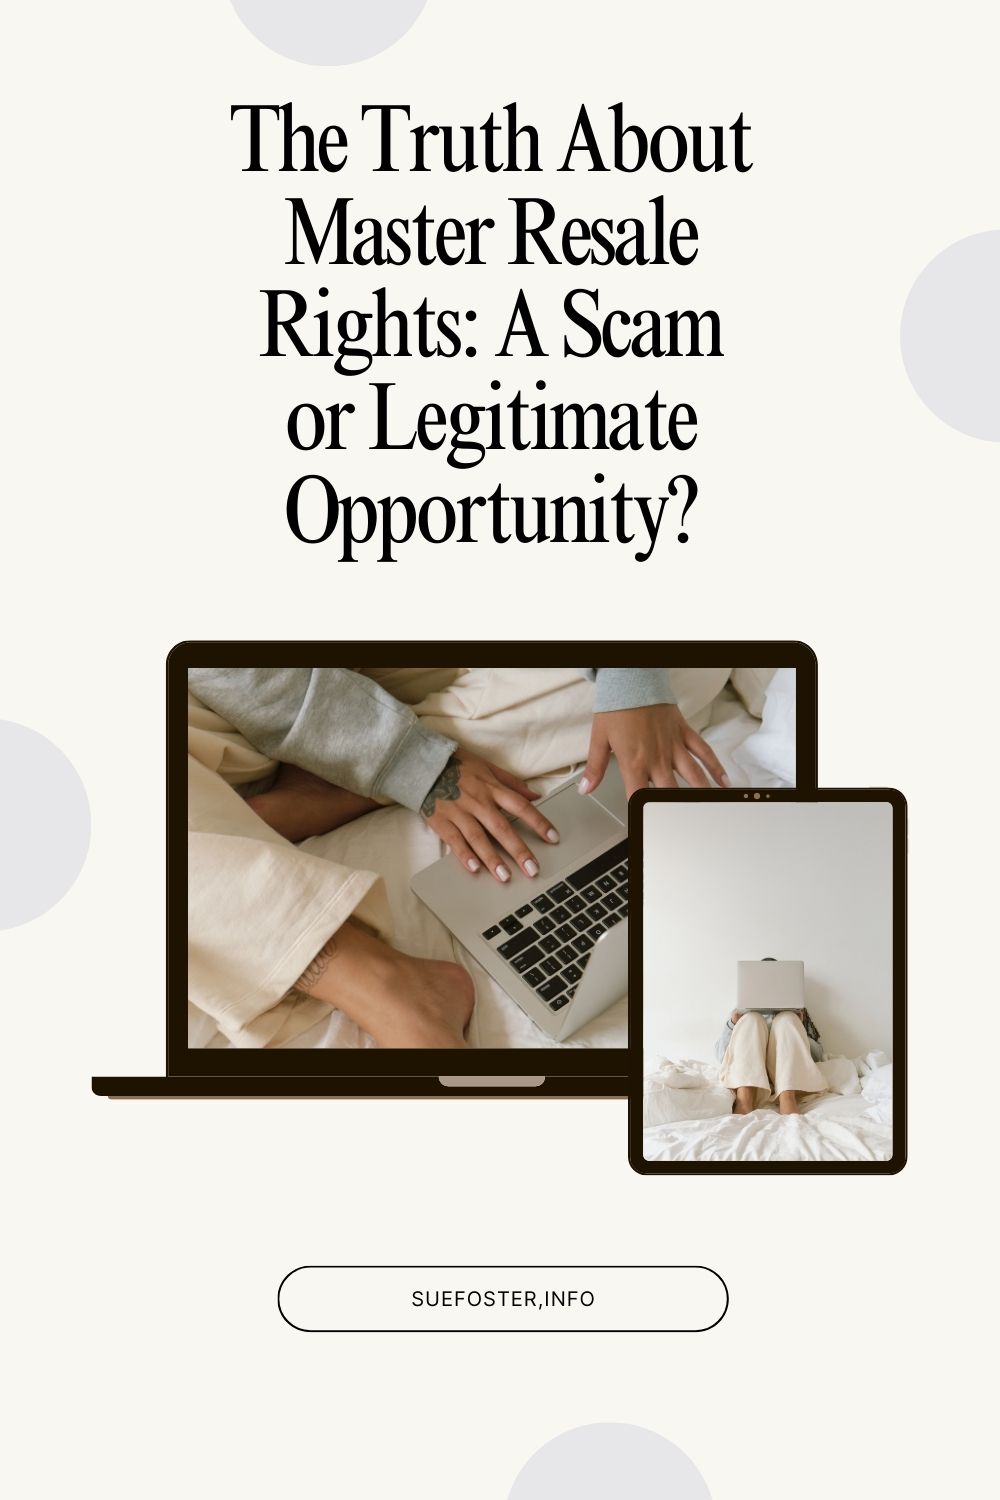 The-Truth-About-Master-Resale-Rights-A-Scam-or-Legitimate-Opportunity